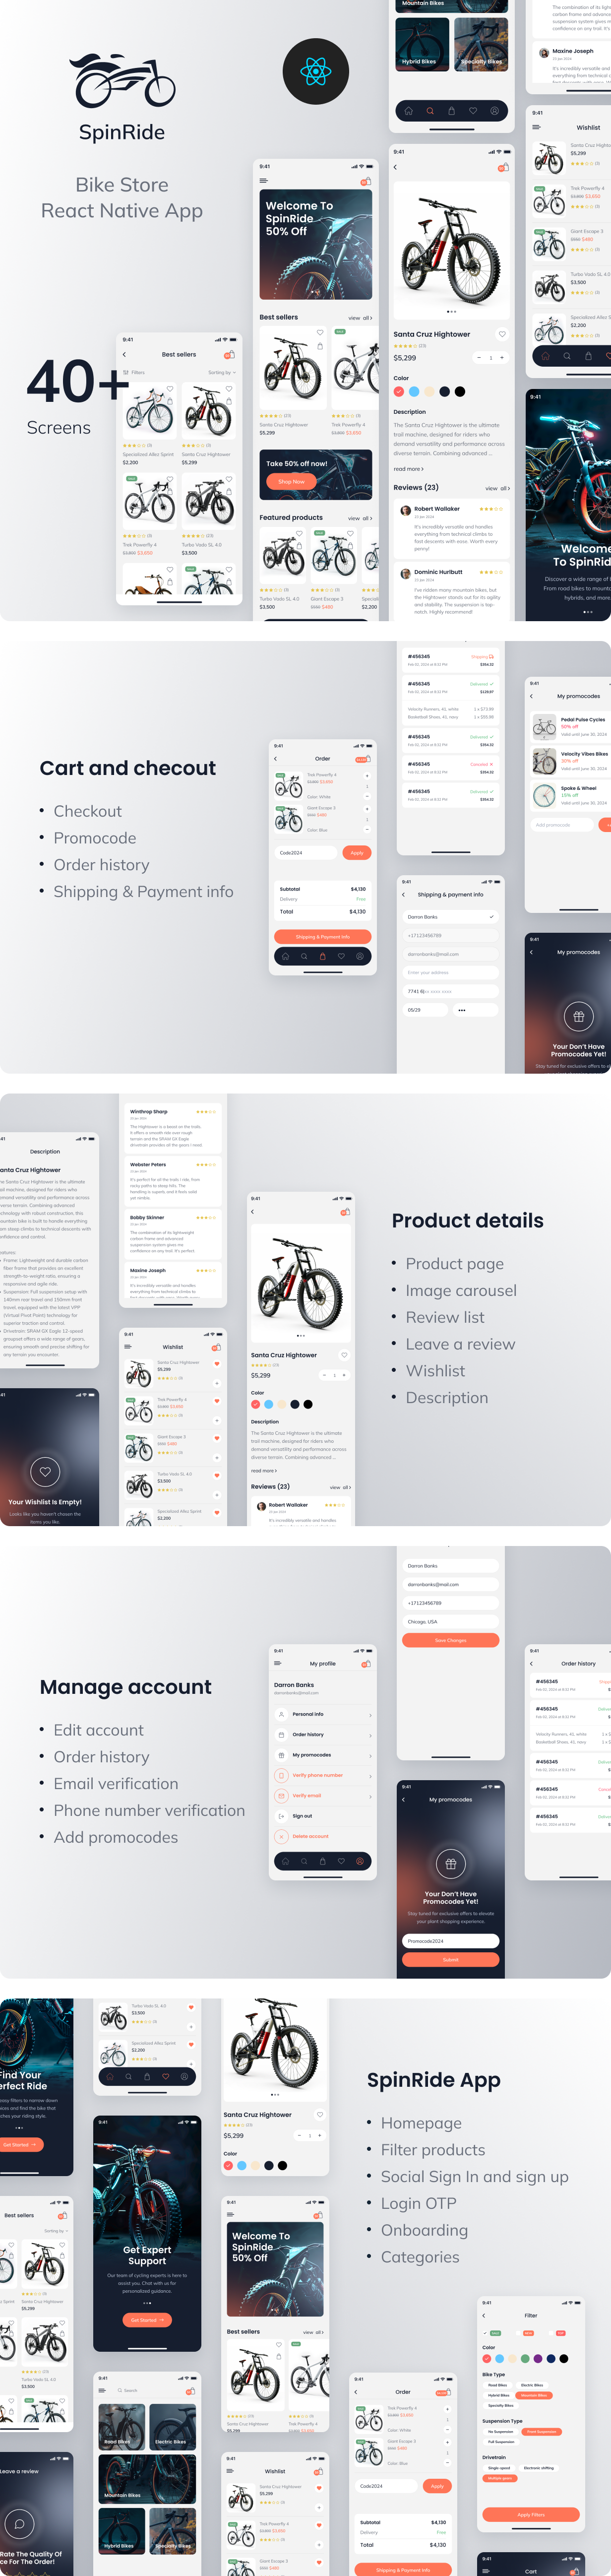 SpinRide - Bike Store Mobile App | React Native CLI 0.74.2 | Frontend + Backend + Admin Panel - 8